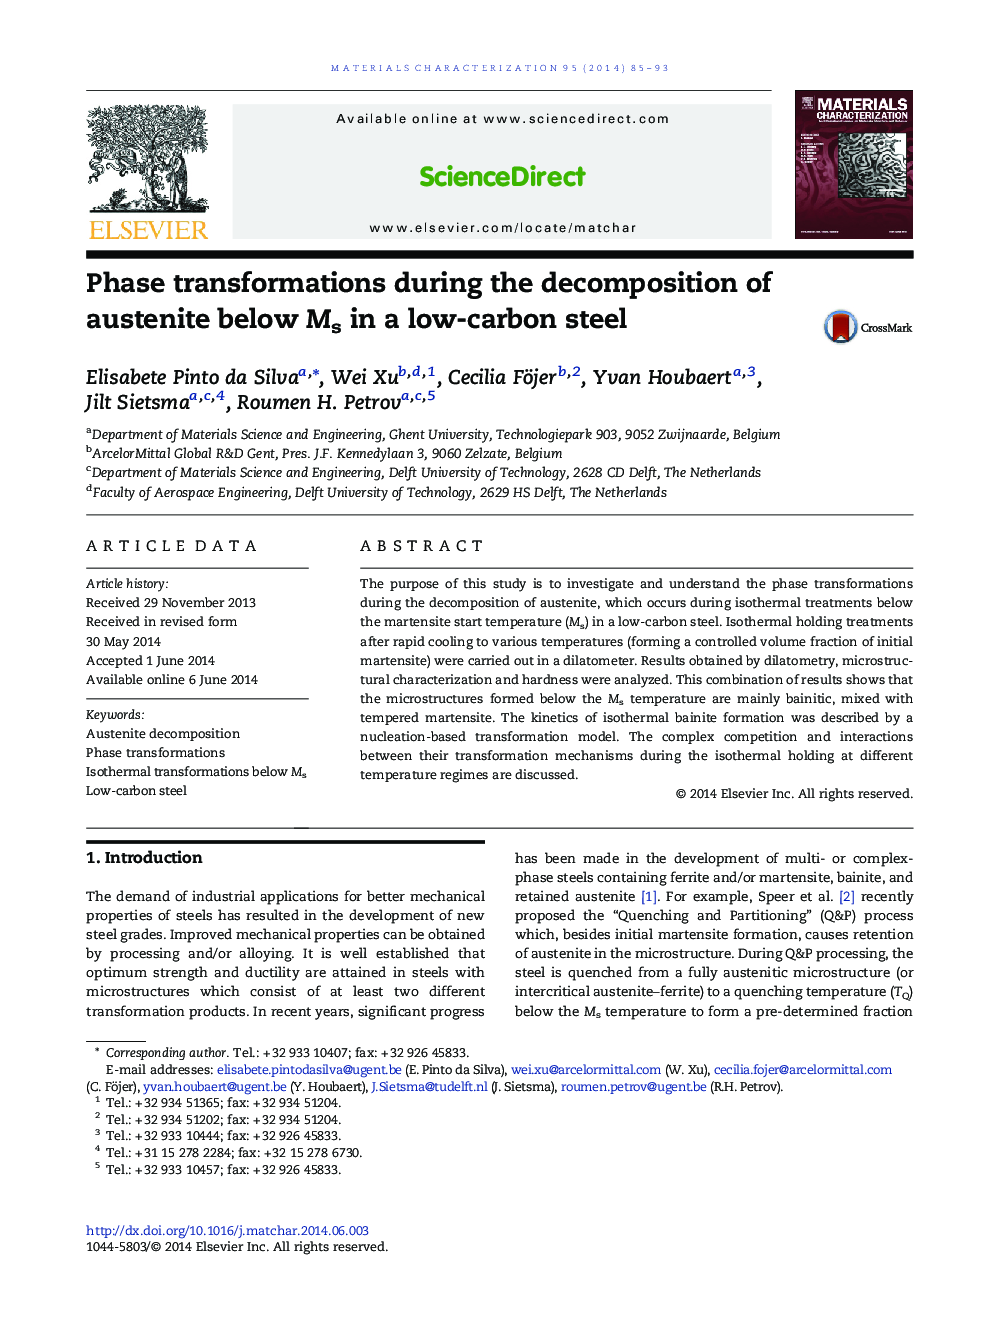 Phase transformations during the decomposition of austenite below Ms in a low-carbon steel